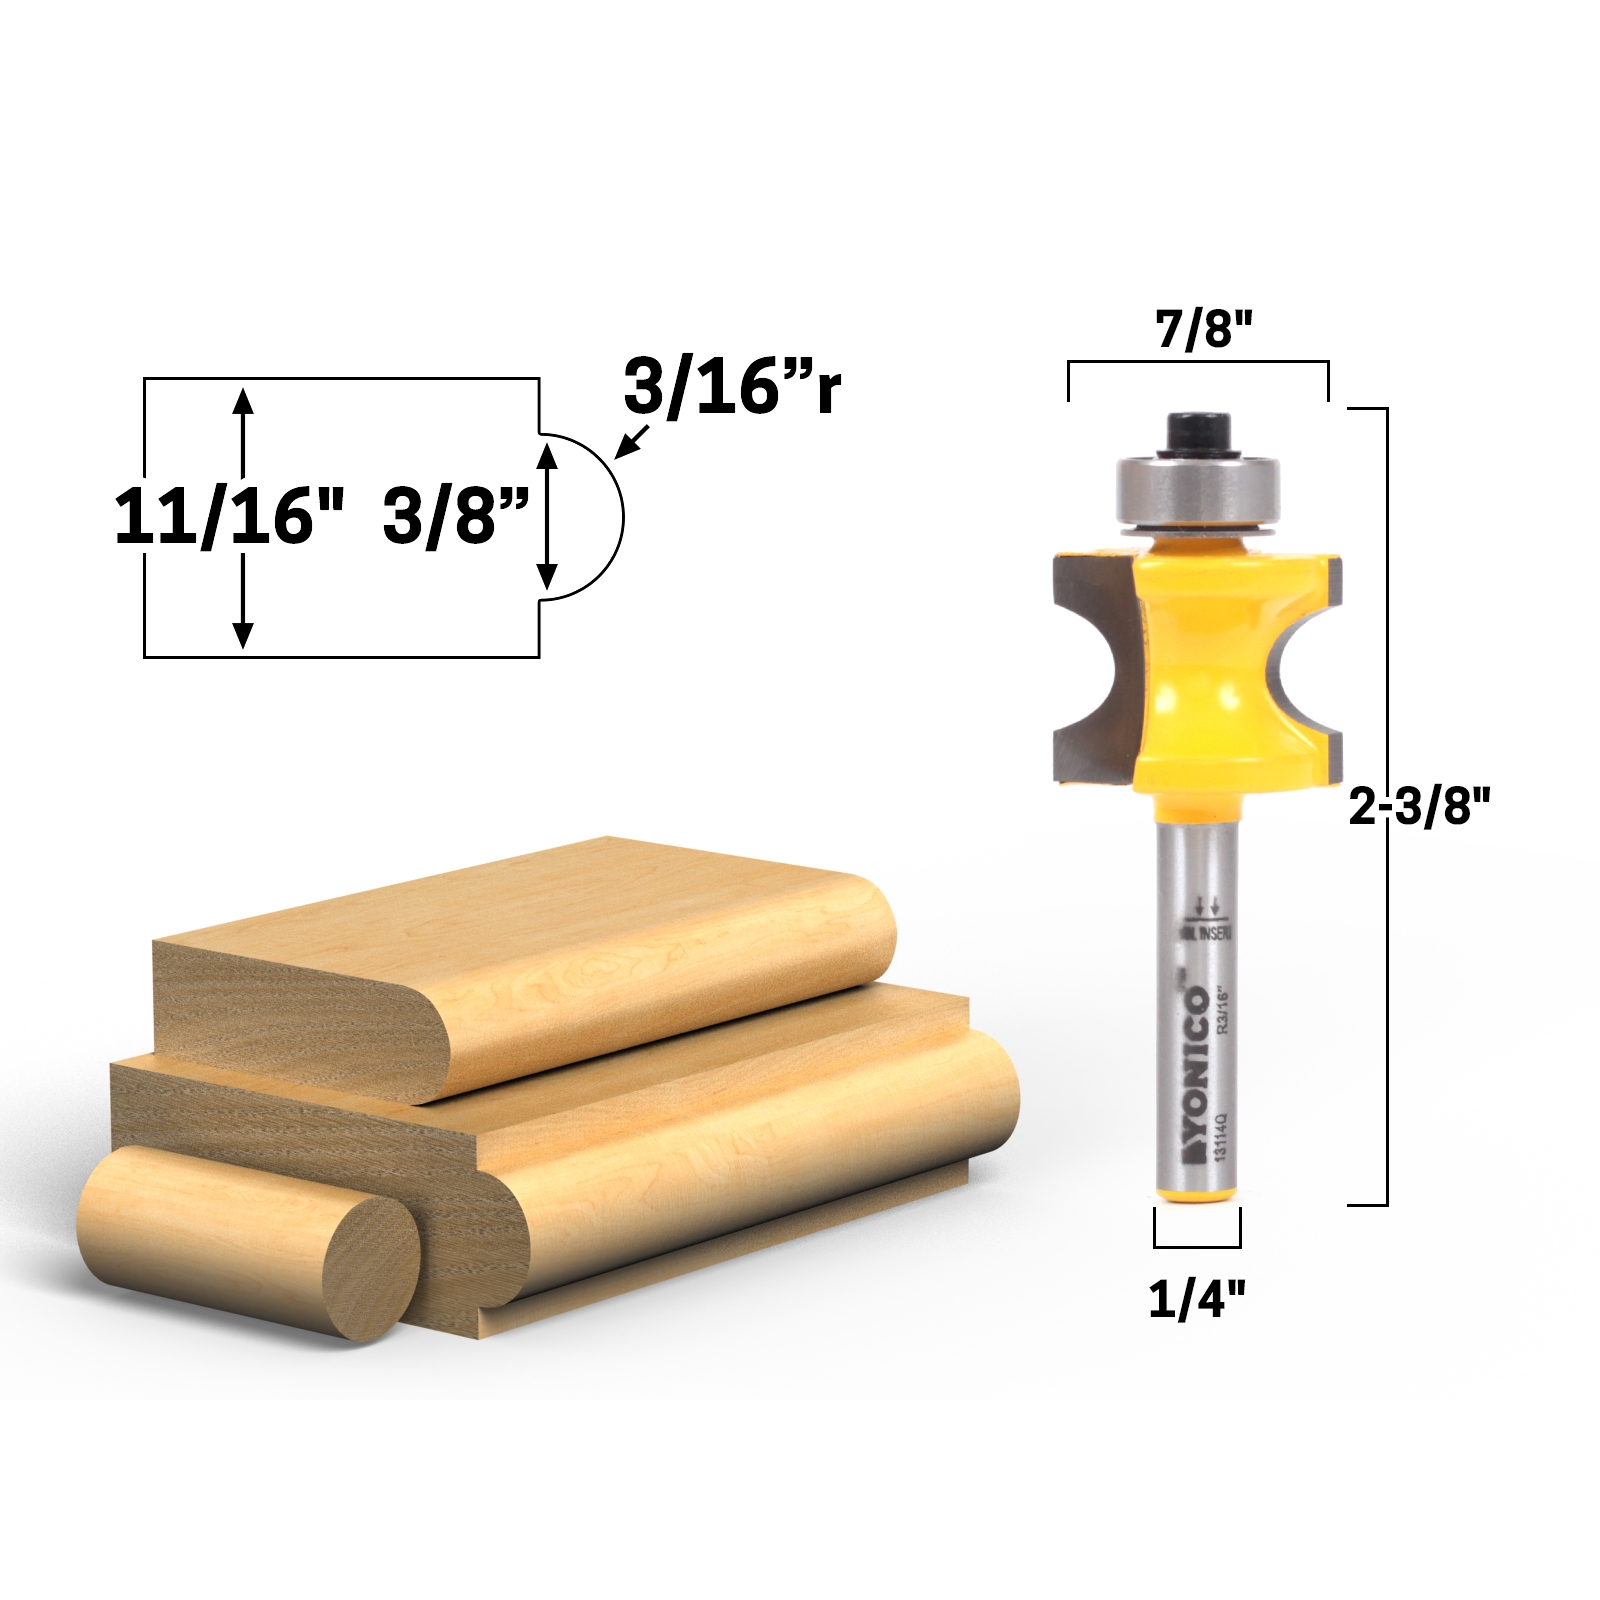 NEW  3/16" R Classical Ogee Edge Profile Carbide Tip Router Bit qw 3 